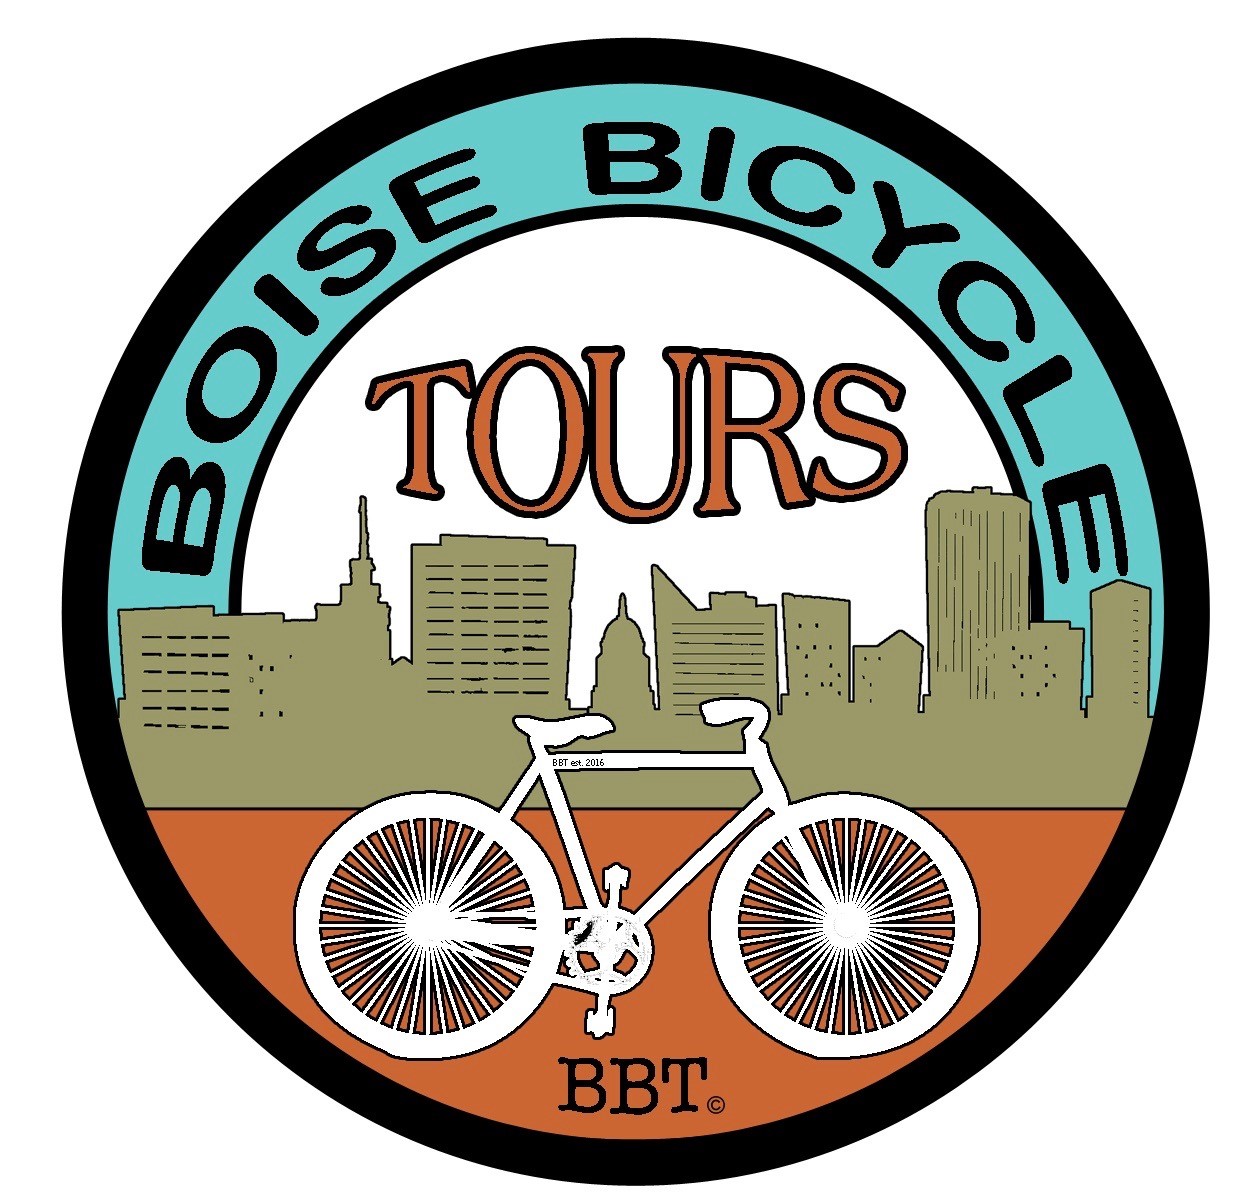 Boise Bicycle Tours (BBT)